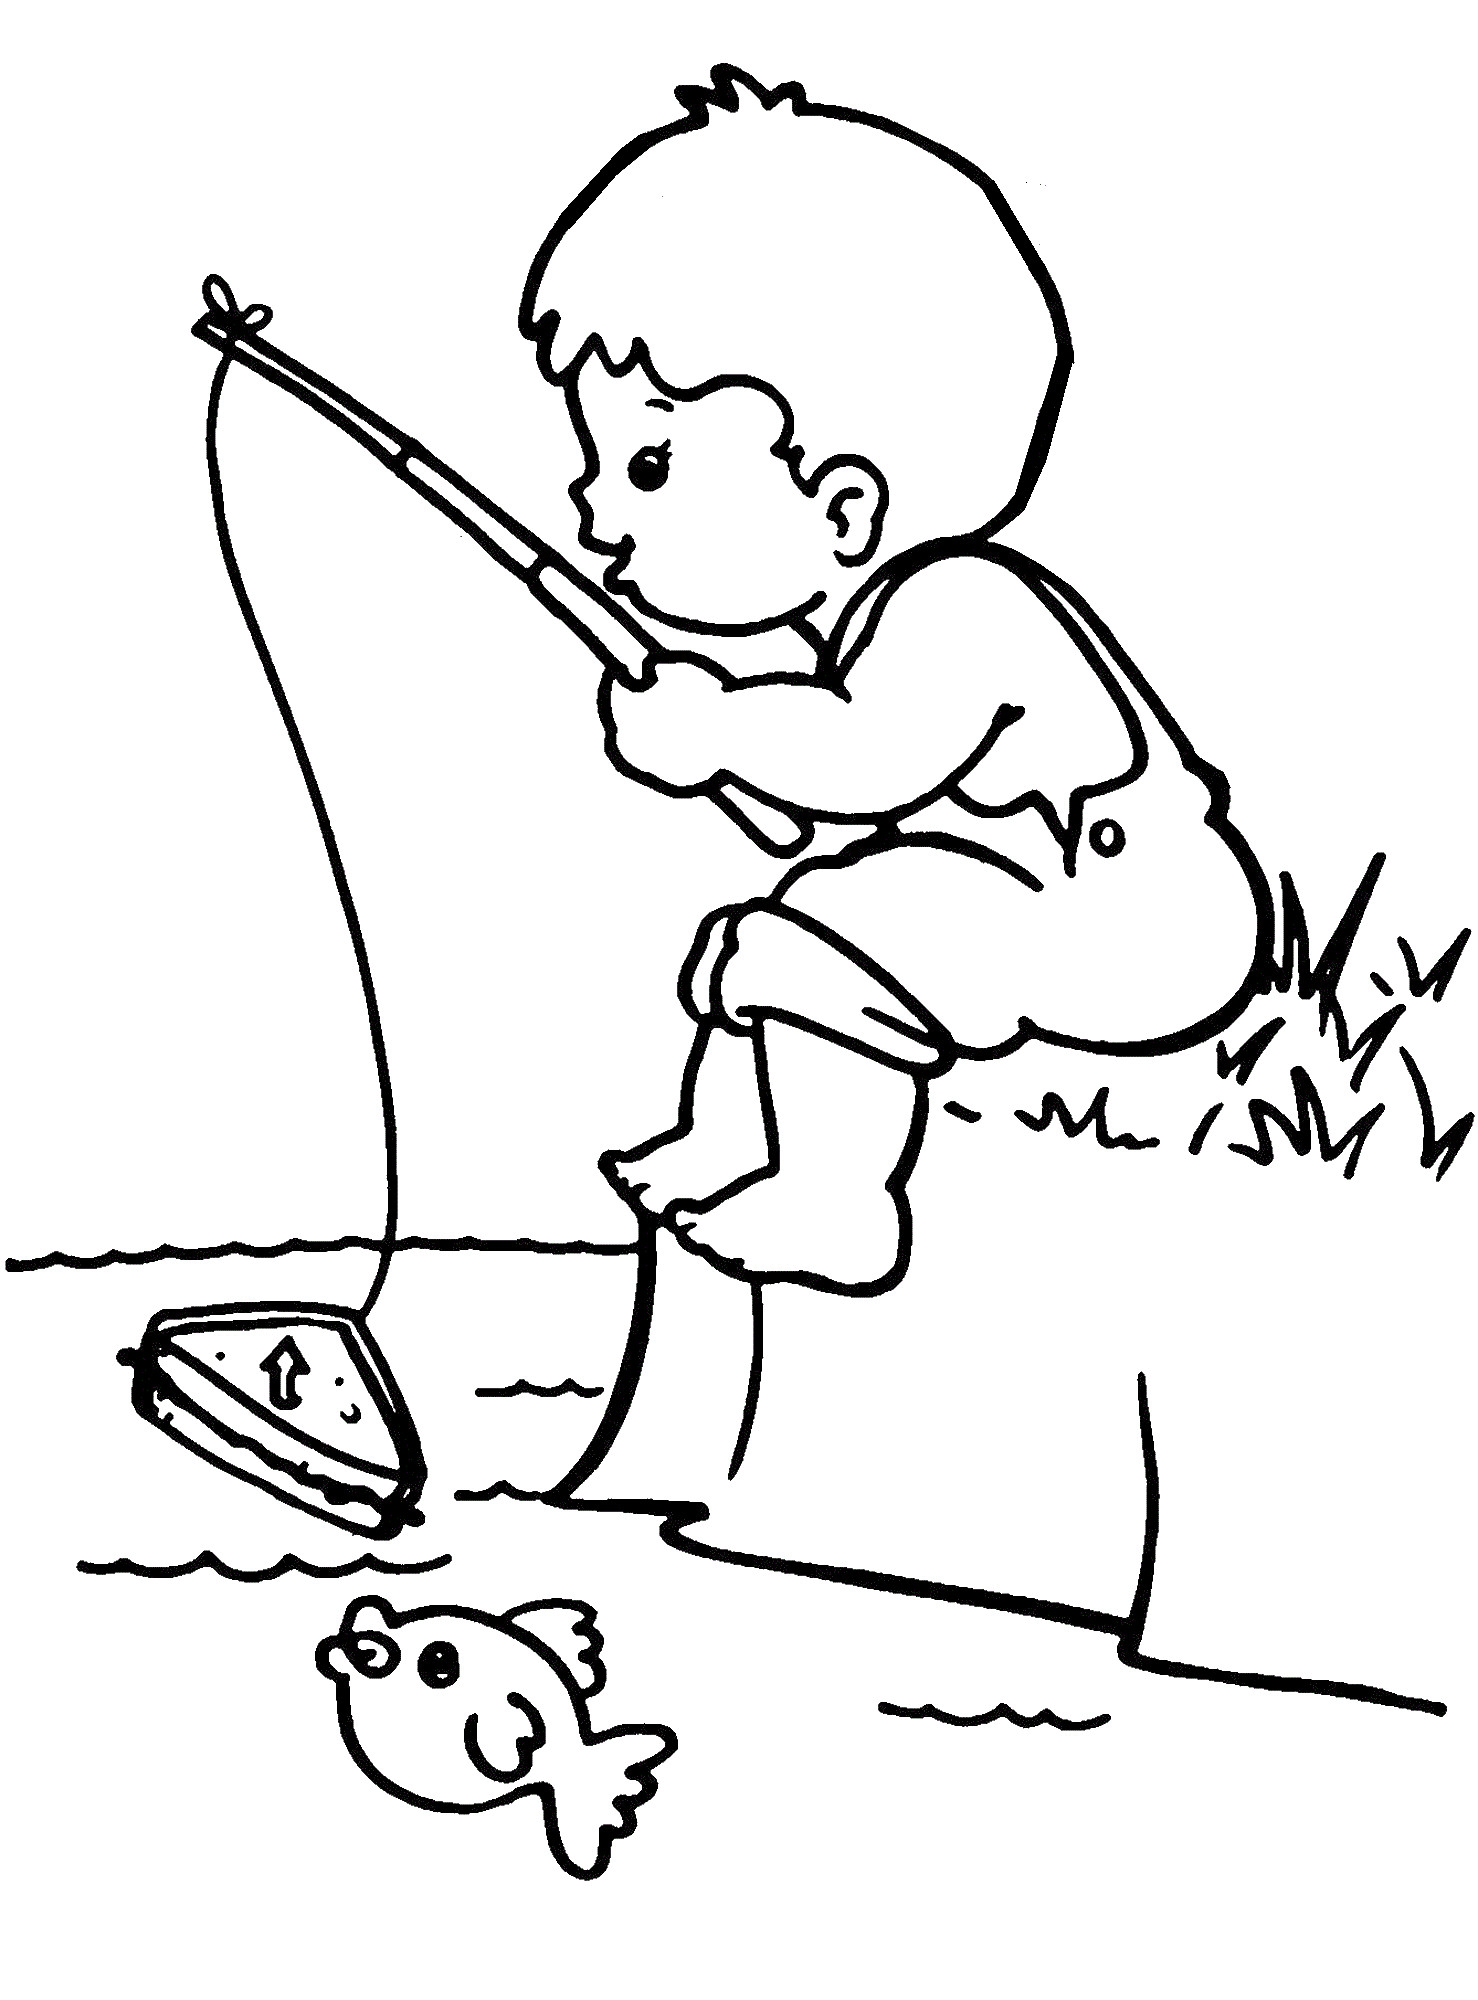 Coloring Pages For Boys To Print
 Fishing Coloring Pages Best Coloring Pages For Kids